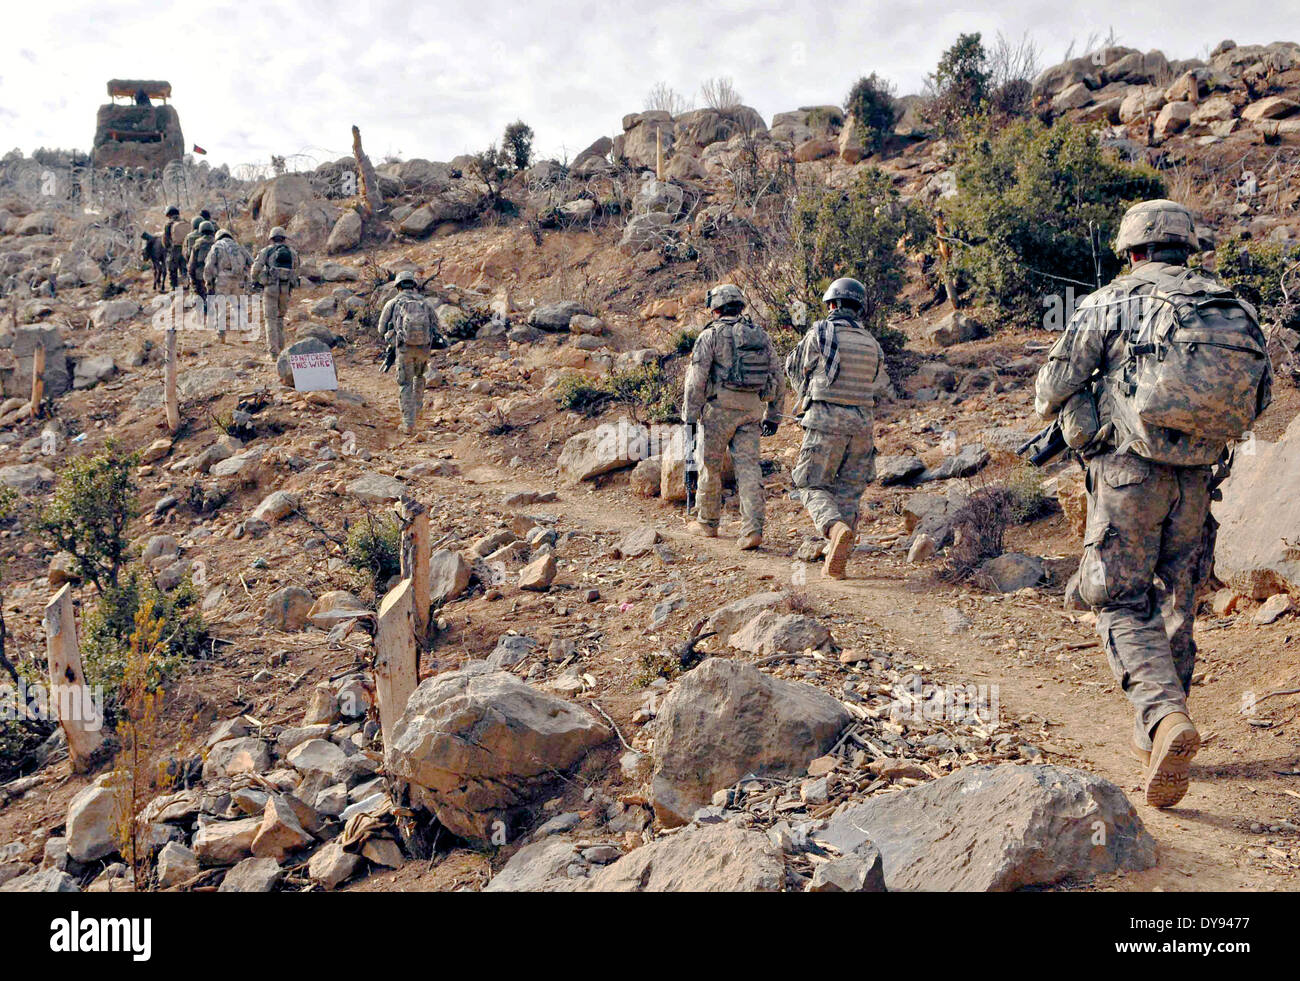 US Army soldiers return inside the wire after a security patrol to destroy a Taliban safe house December 18, 2009 in Khost province, Afghanistan. Stock Photo